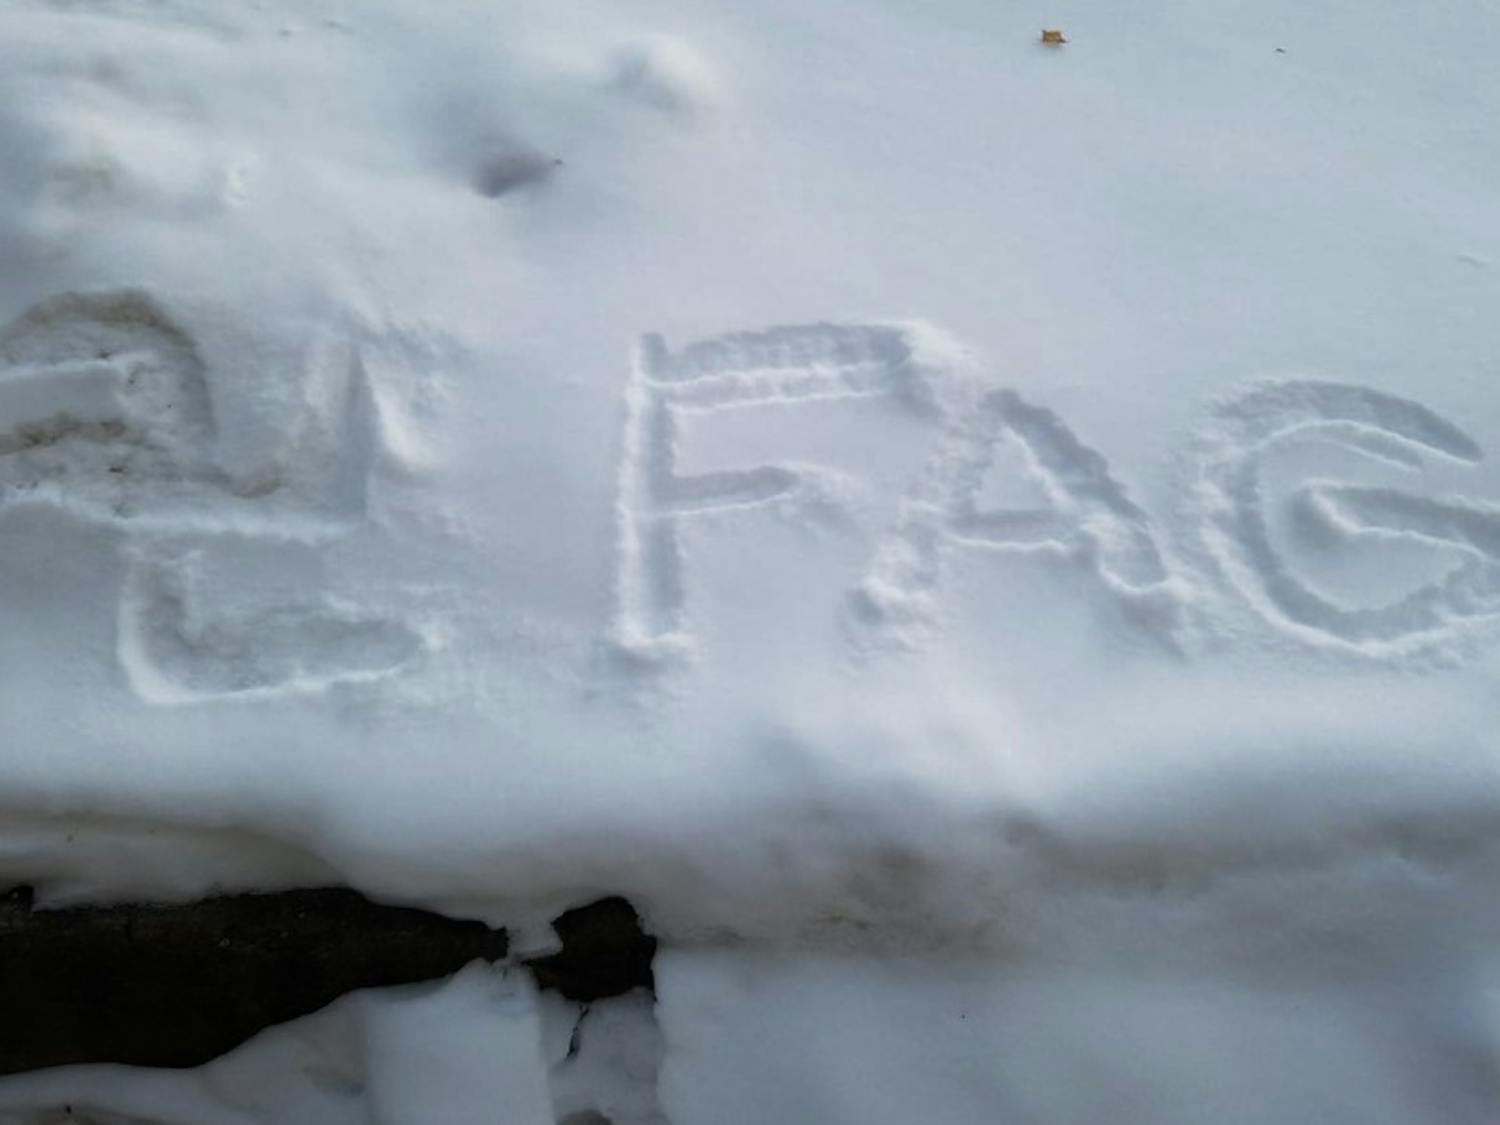 A swastika and the homosexual slur “FAG” were discovered written in the snow between Botany Gardens and Chamberlin Hall early Tuesday morning.